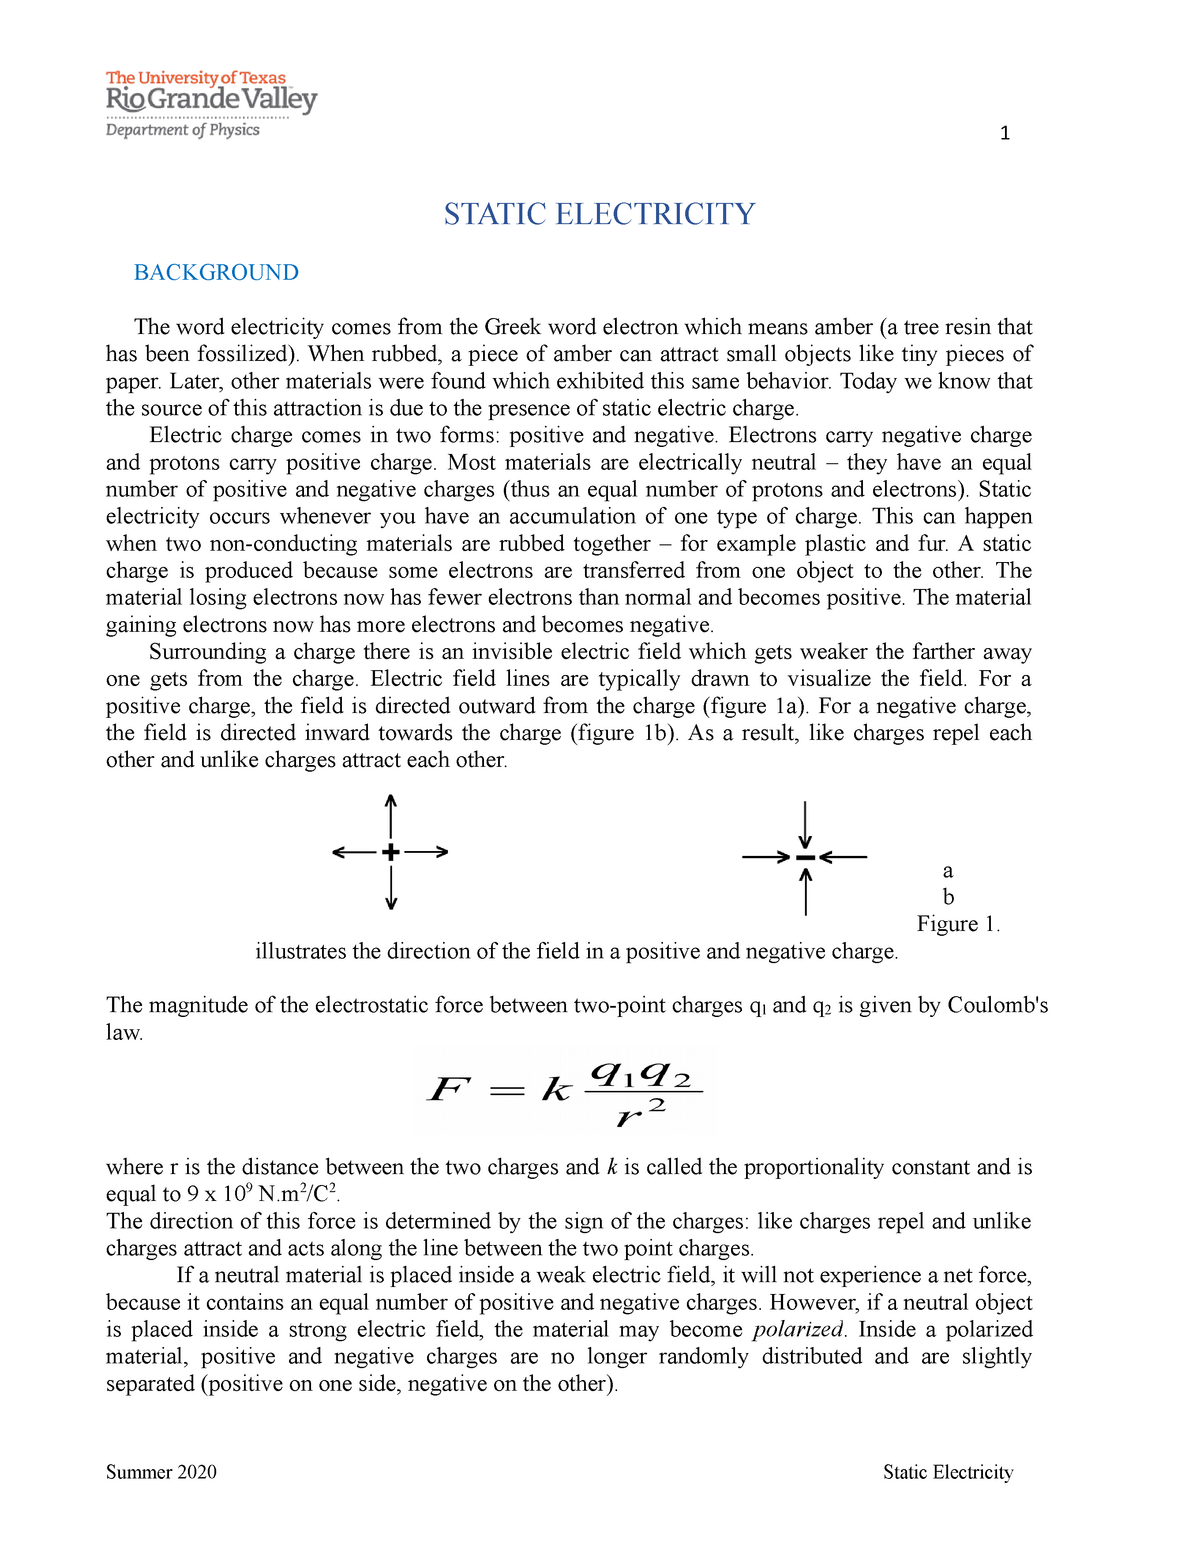 research papers on static electricity